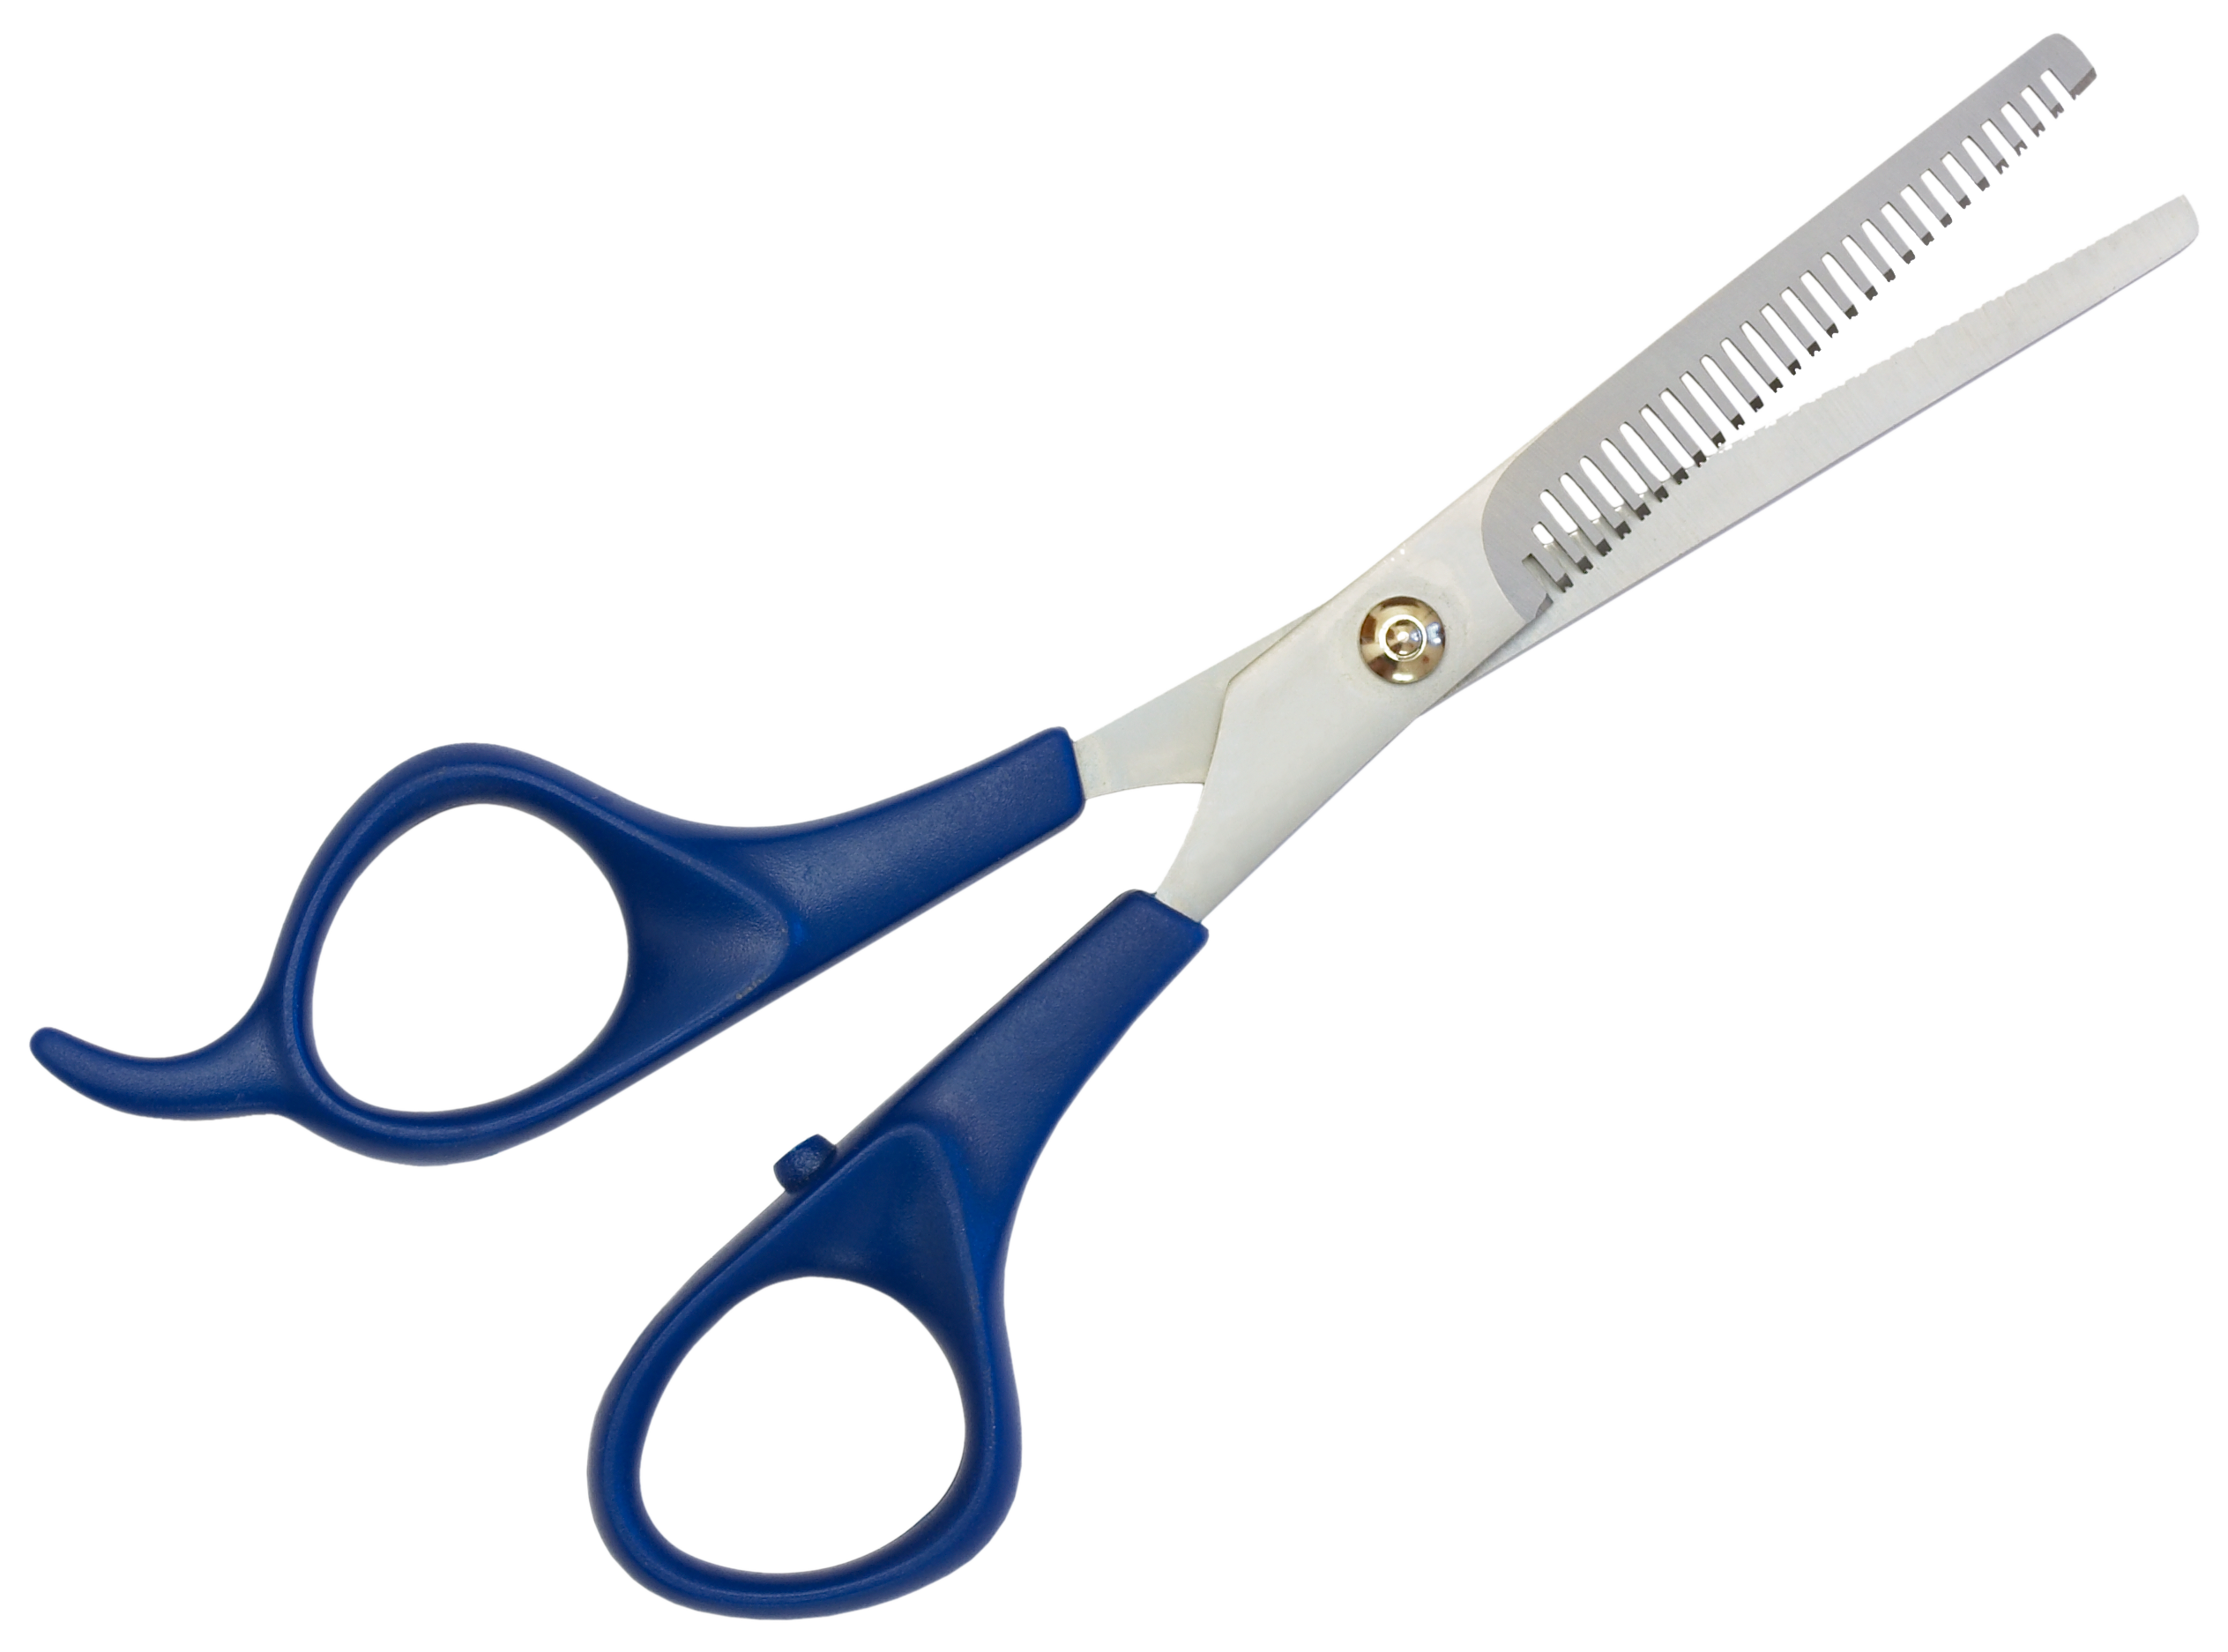 PNG Of A Pair Of Scissors - 158669